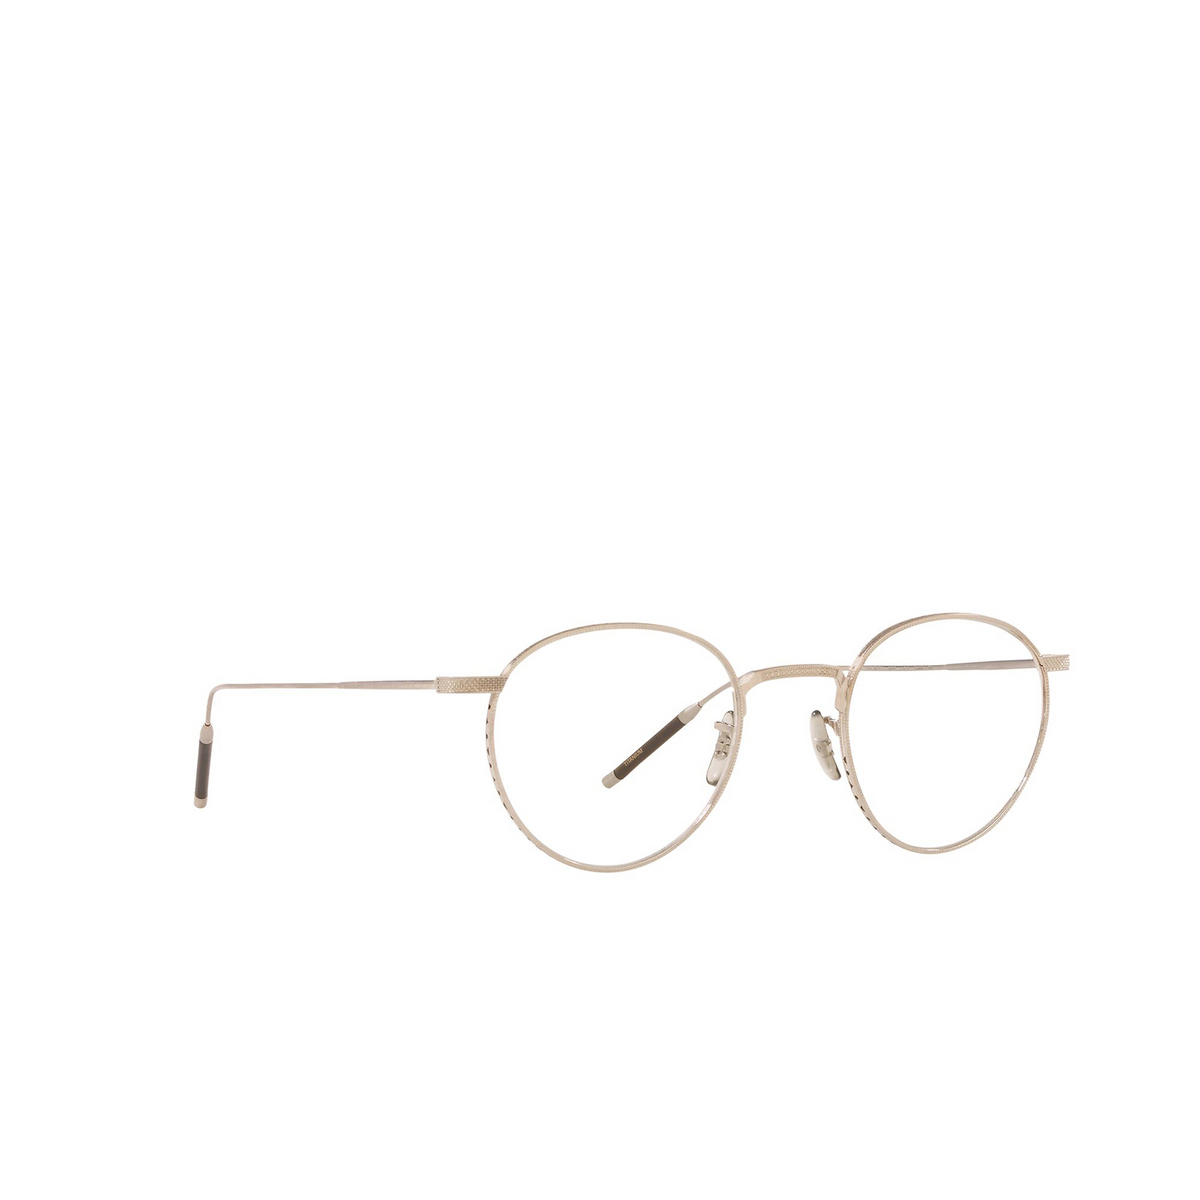 Oliver Peoples® Round Eyeglasses: Tk-1 OV1274T color Brushed Silver 5254 - three-quarters view.